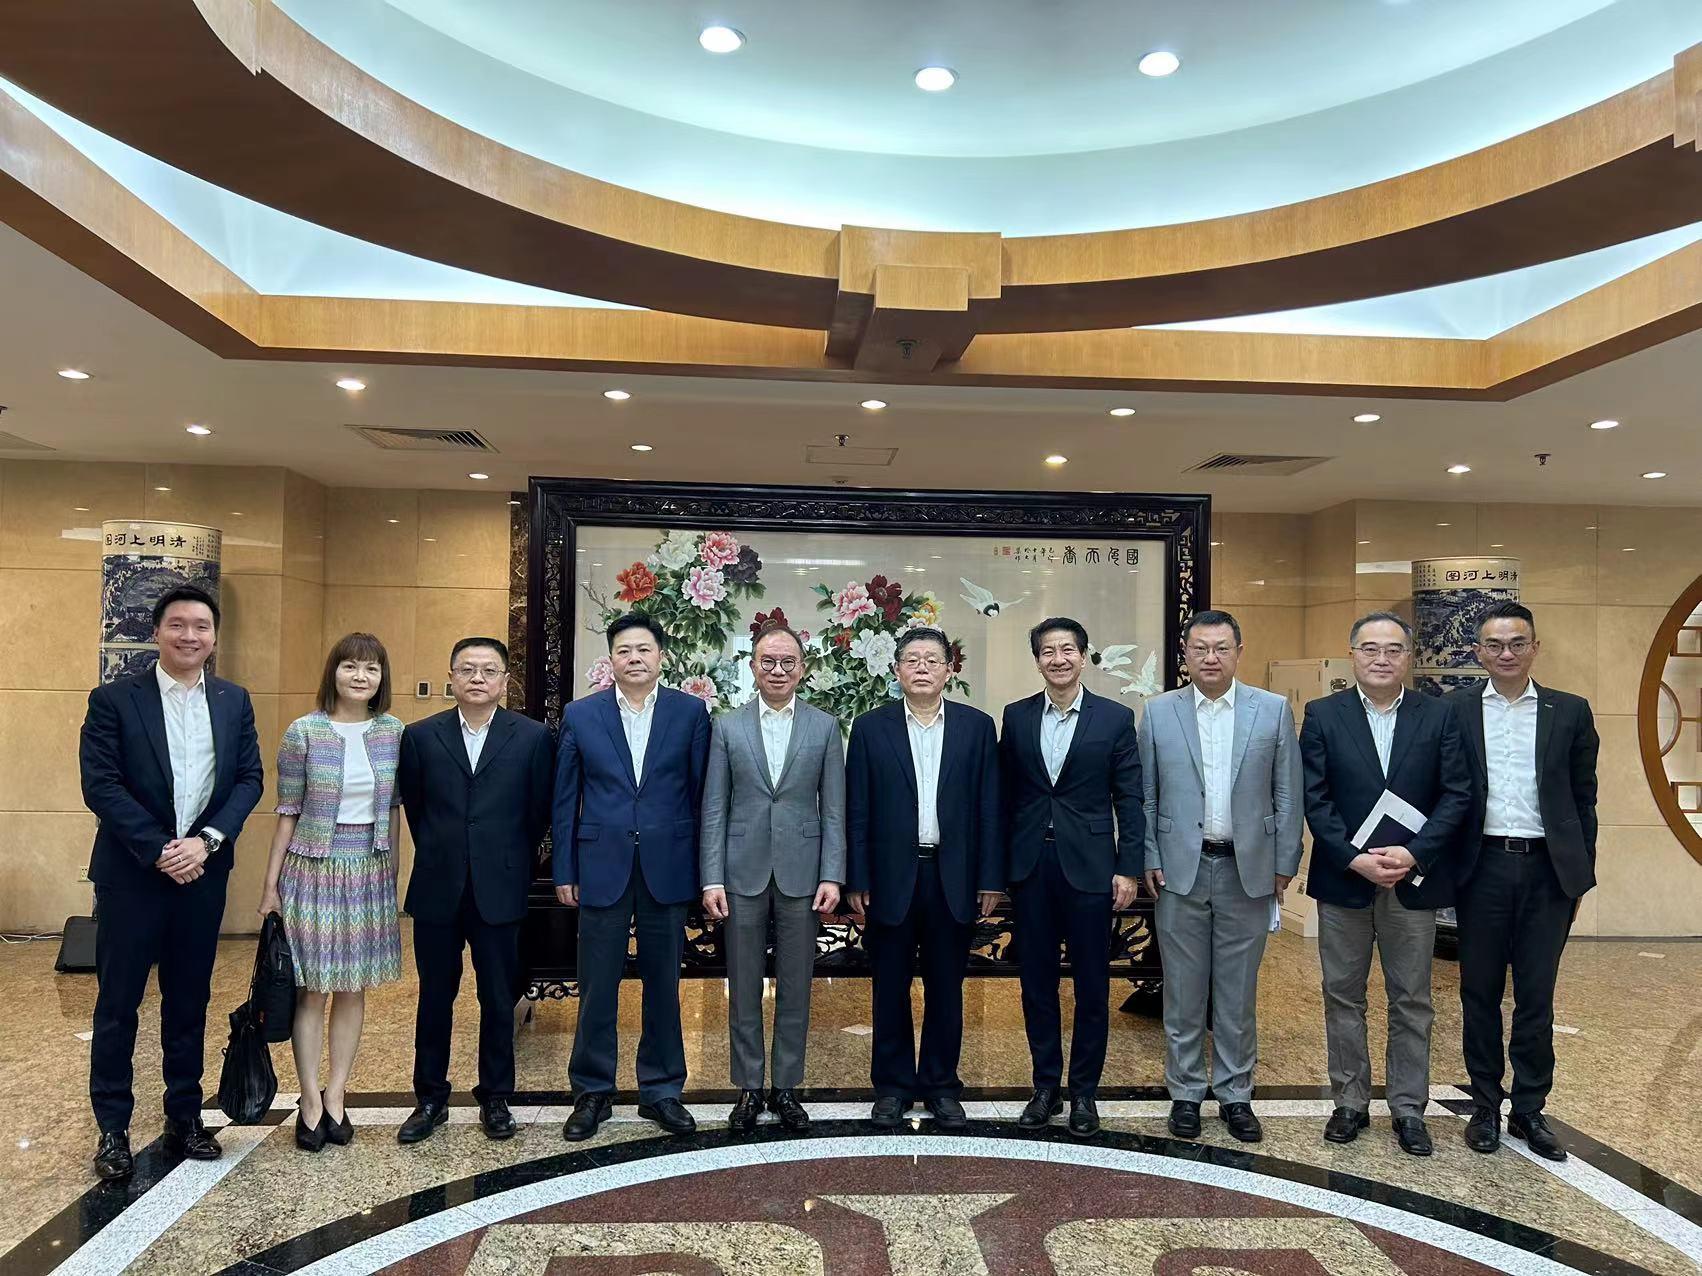 During his visit in Beijing, the Secretary for Constitutional and Mainland Affairs, Mr Erick Tsang Kwok-wai, meets with Deputy Director of the National Development and Reform Commission Mr Guo Lanfeng. Photo shows Mr Tsang (fifth left), Mr Guo (fifth right), the Commissioner for the Development of the Guangdong-Hong Kong-Macao Greater Bay Area, Ms Maisie Chan (second left), and the Director of the Office of the Government of the Hong Kong Special Administrative Region in Beijing, Mr Rex Chang (fourth right) taking a group photo.